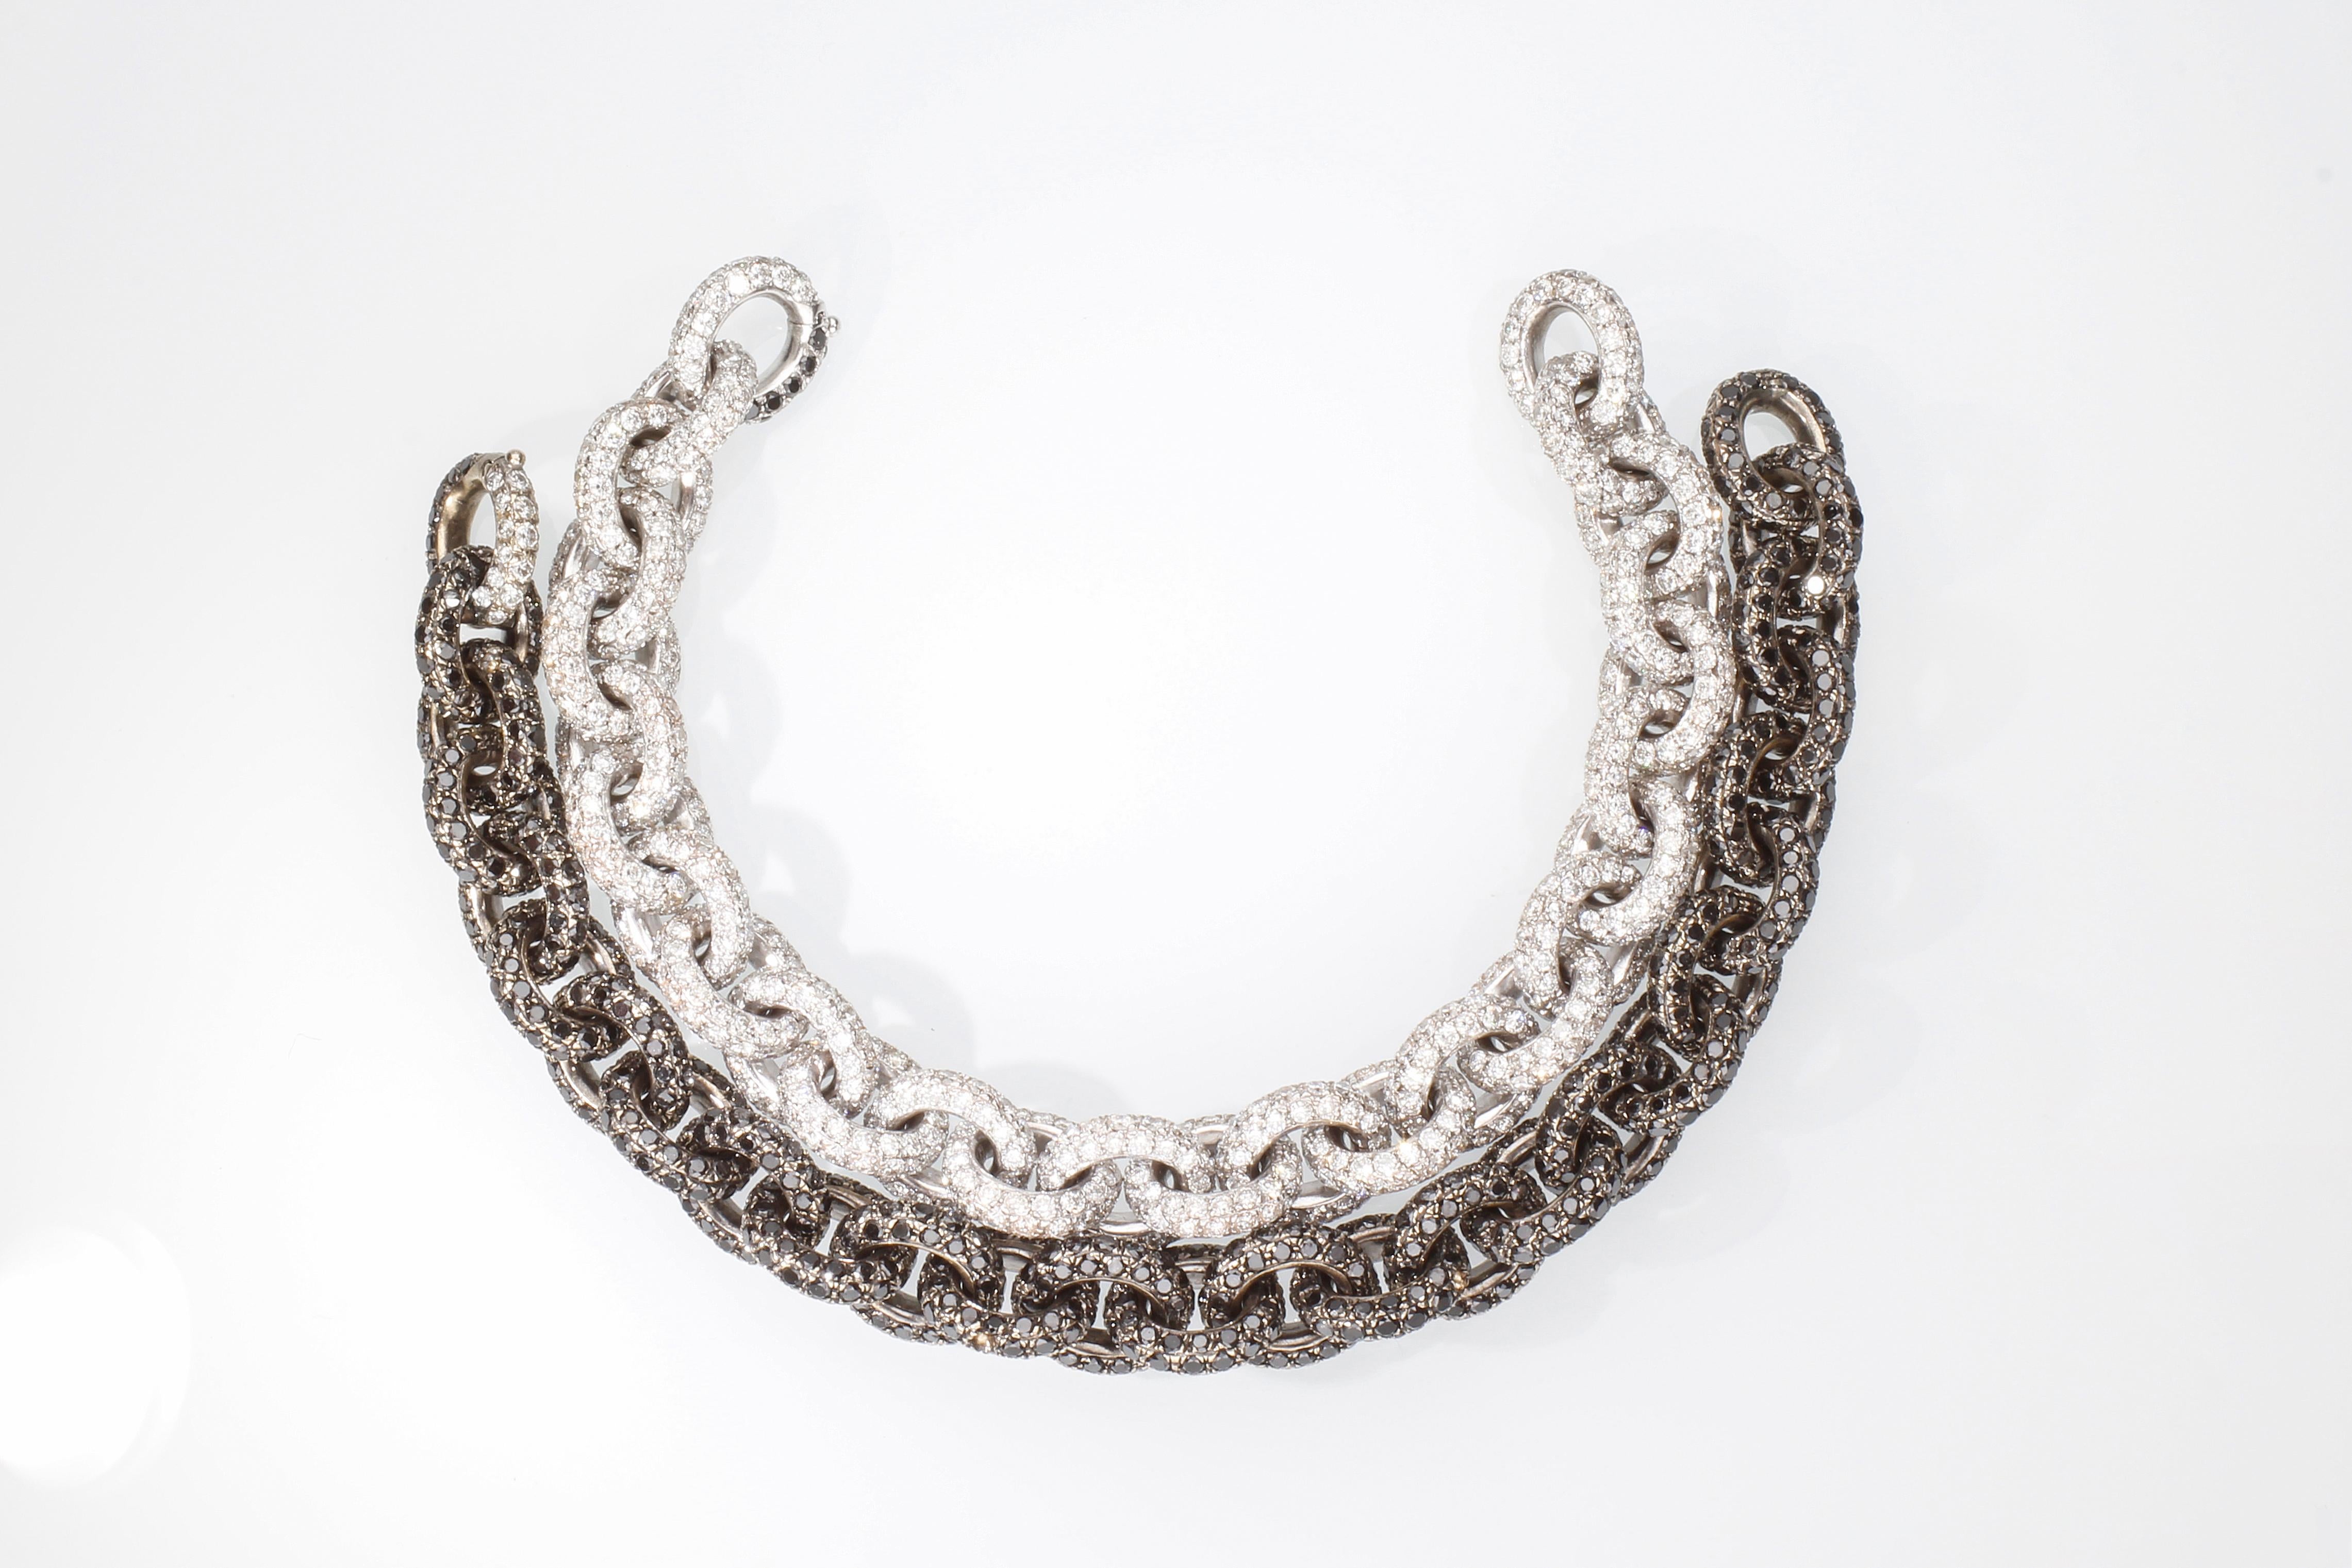 Chain Bracelet with 30.76 Ct of White Diamonds. Handmade. Made in Italy For Sale 2